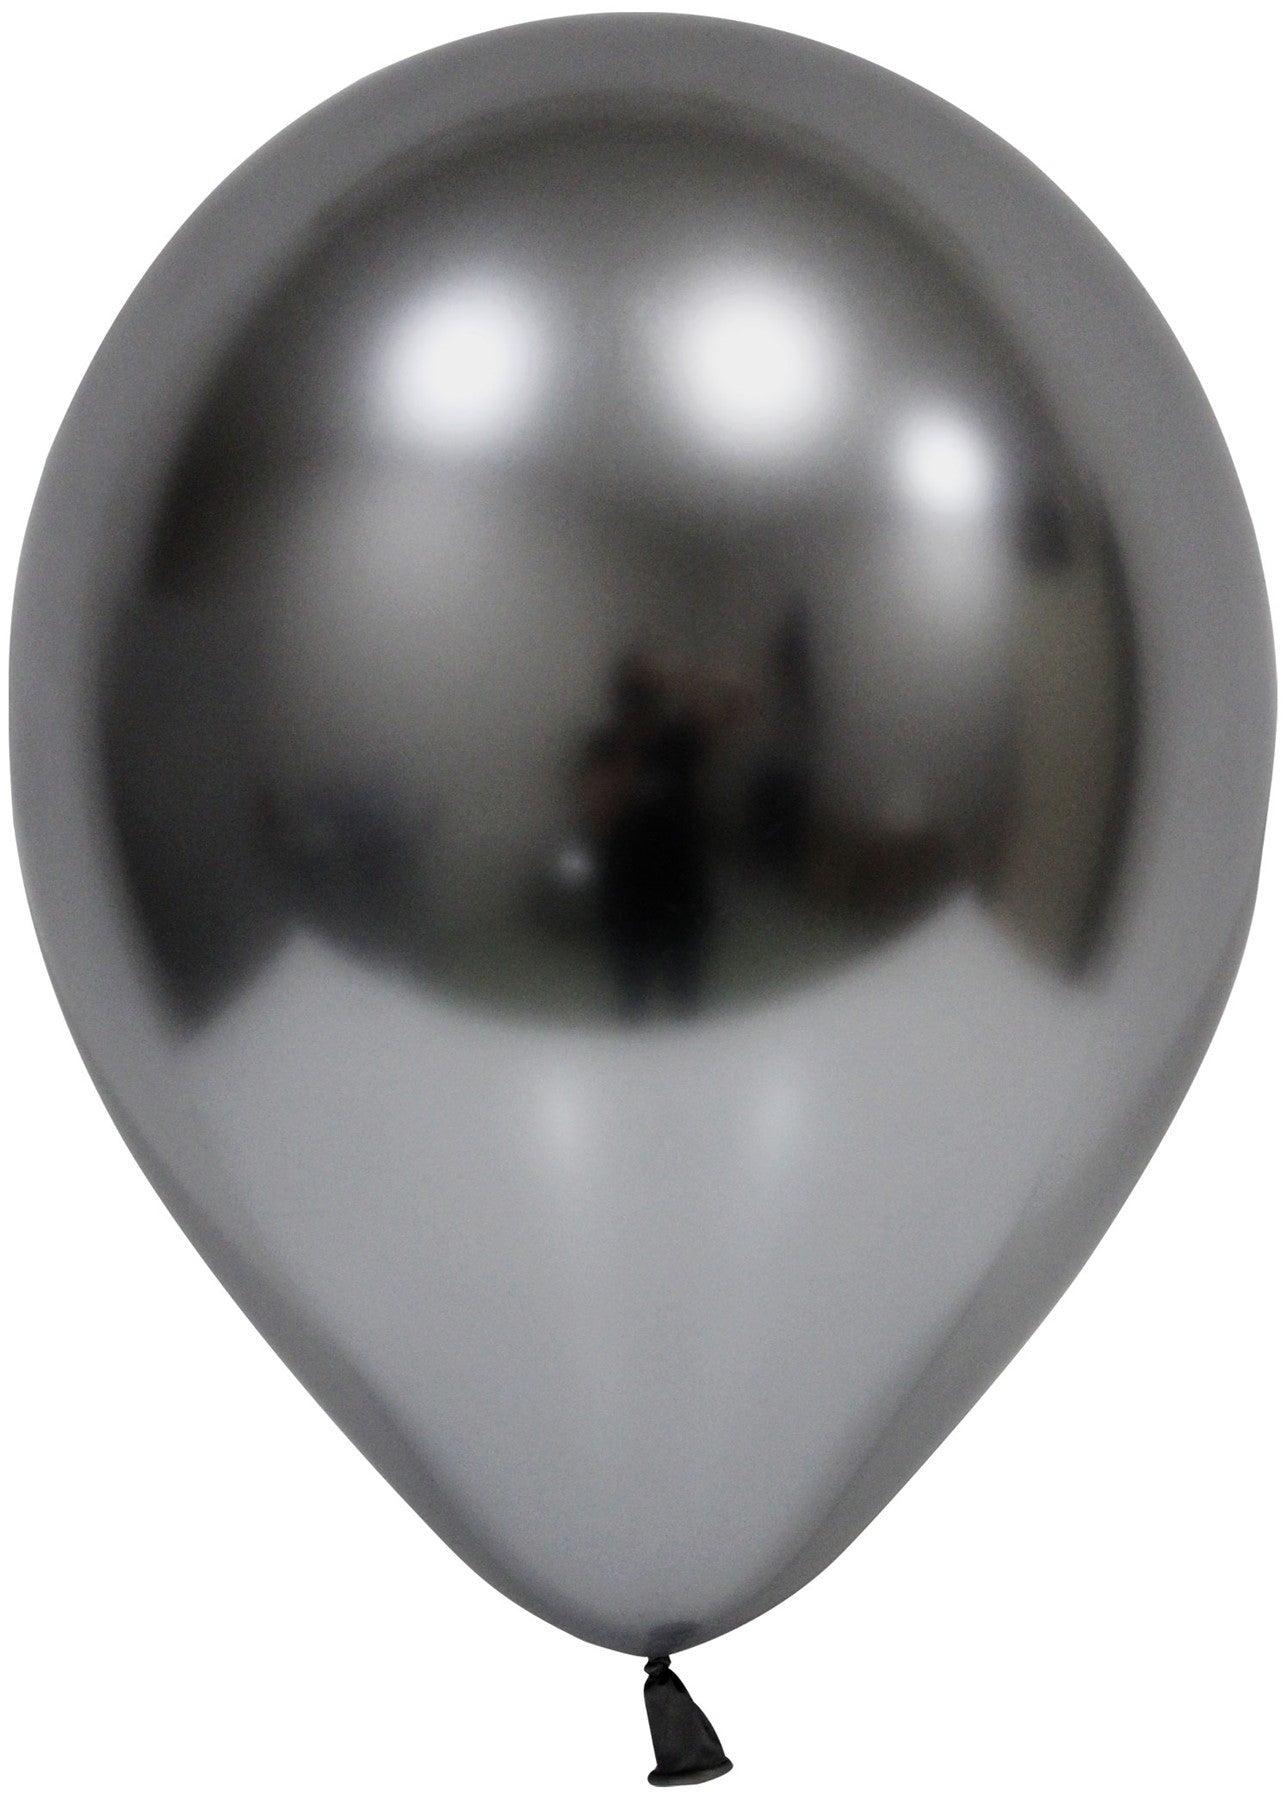 View Space Grey Chrome Latex Balloon 12 inch Pk 50 information